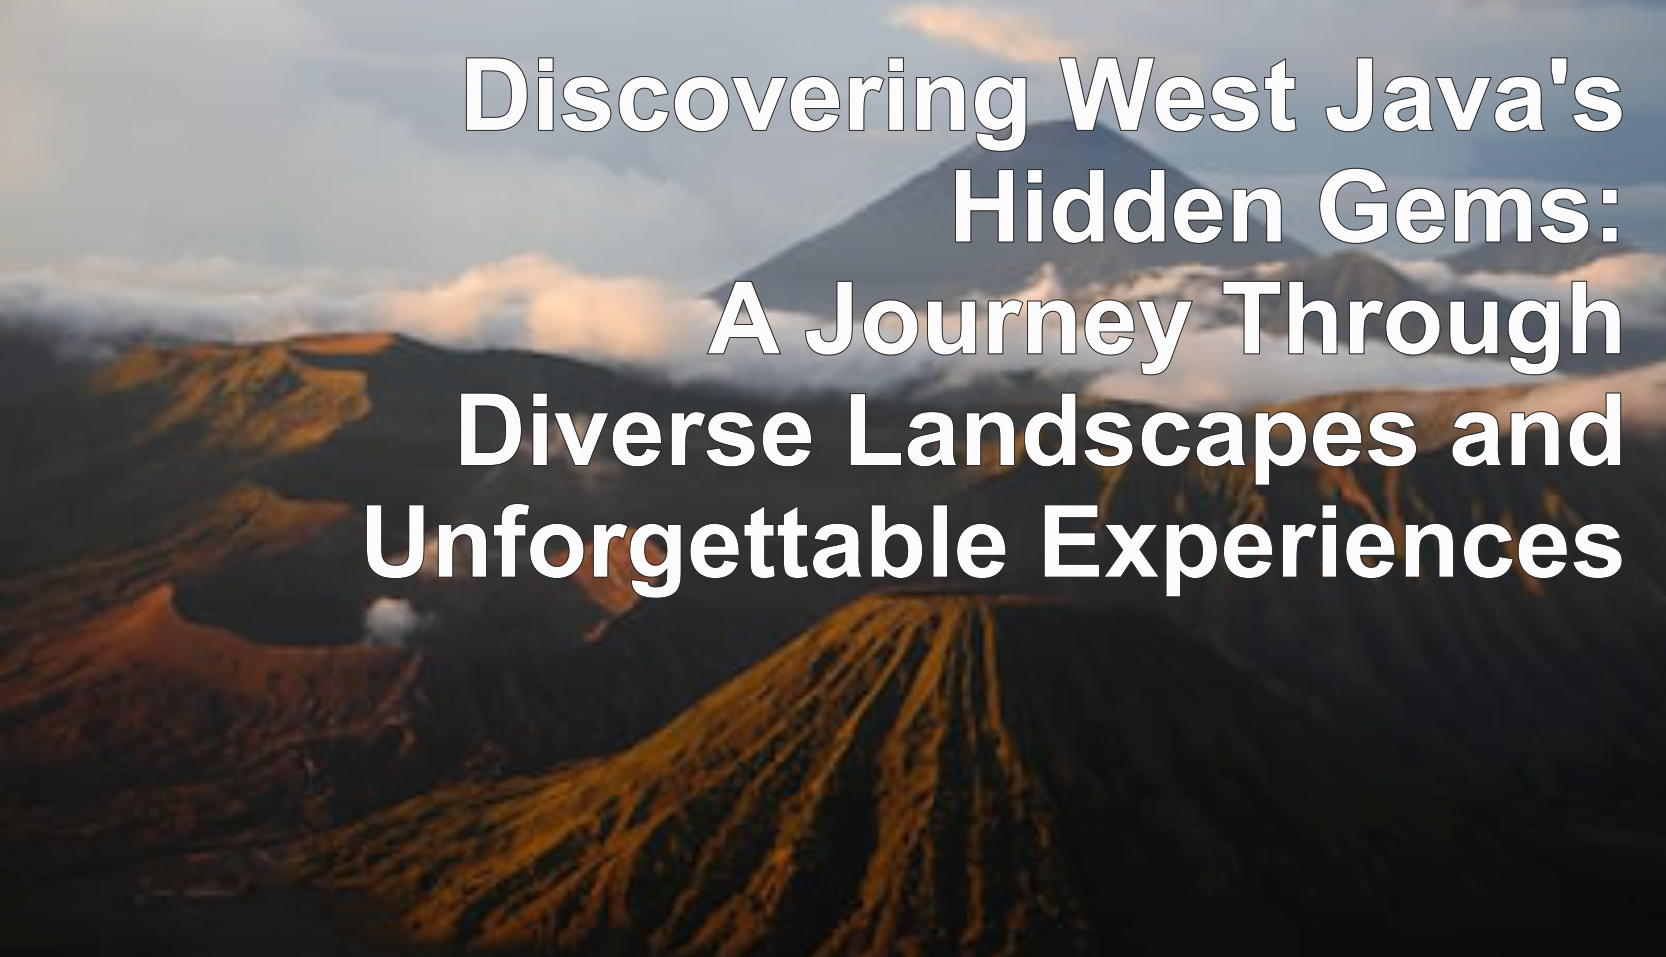 Discovering West Java's Hidden Gems: A Journey Through Diverse Landscapes and Unforgettable Experiences